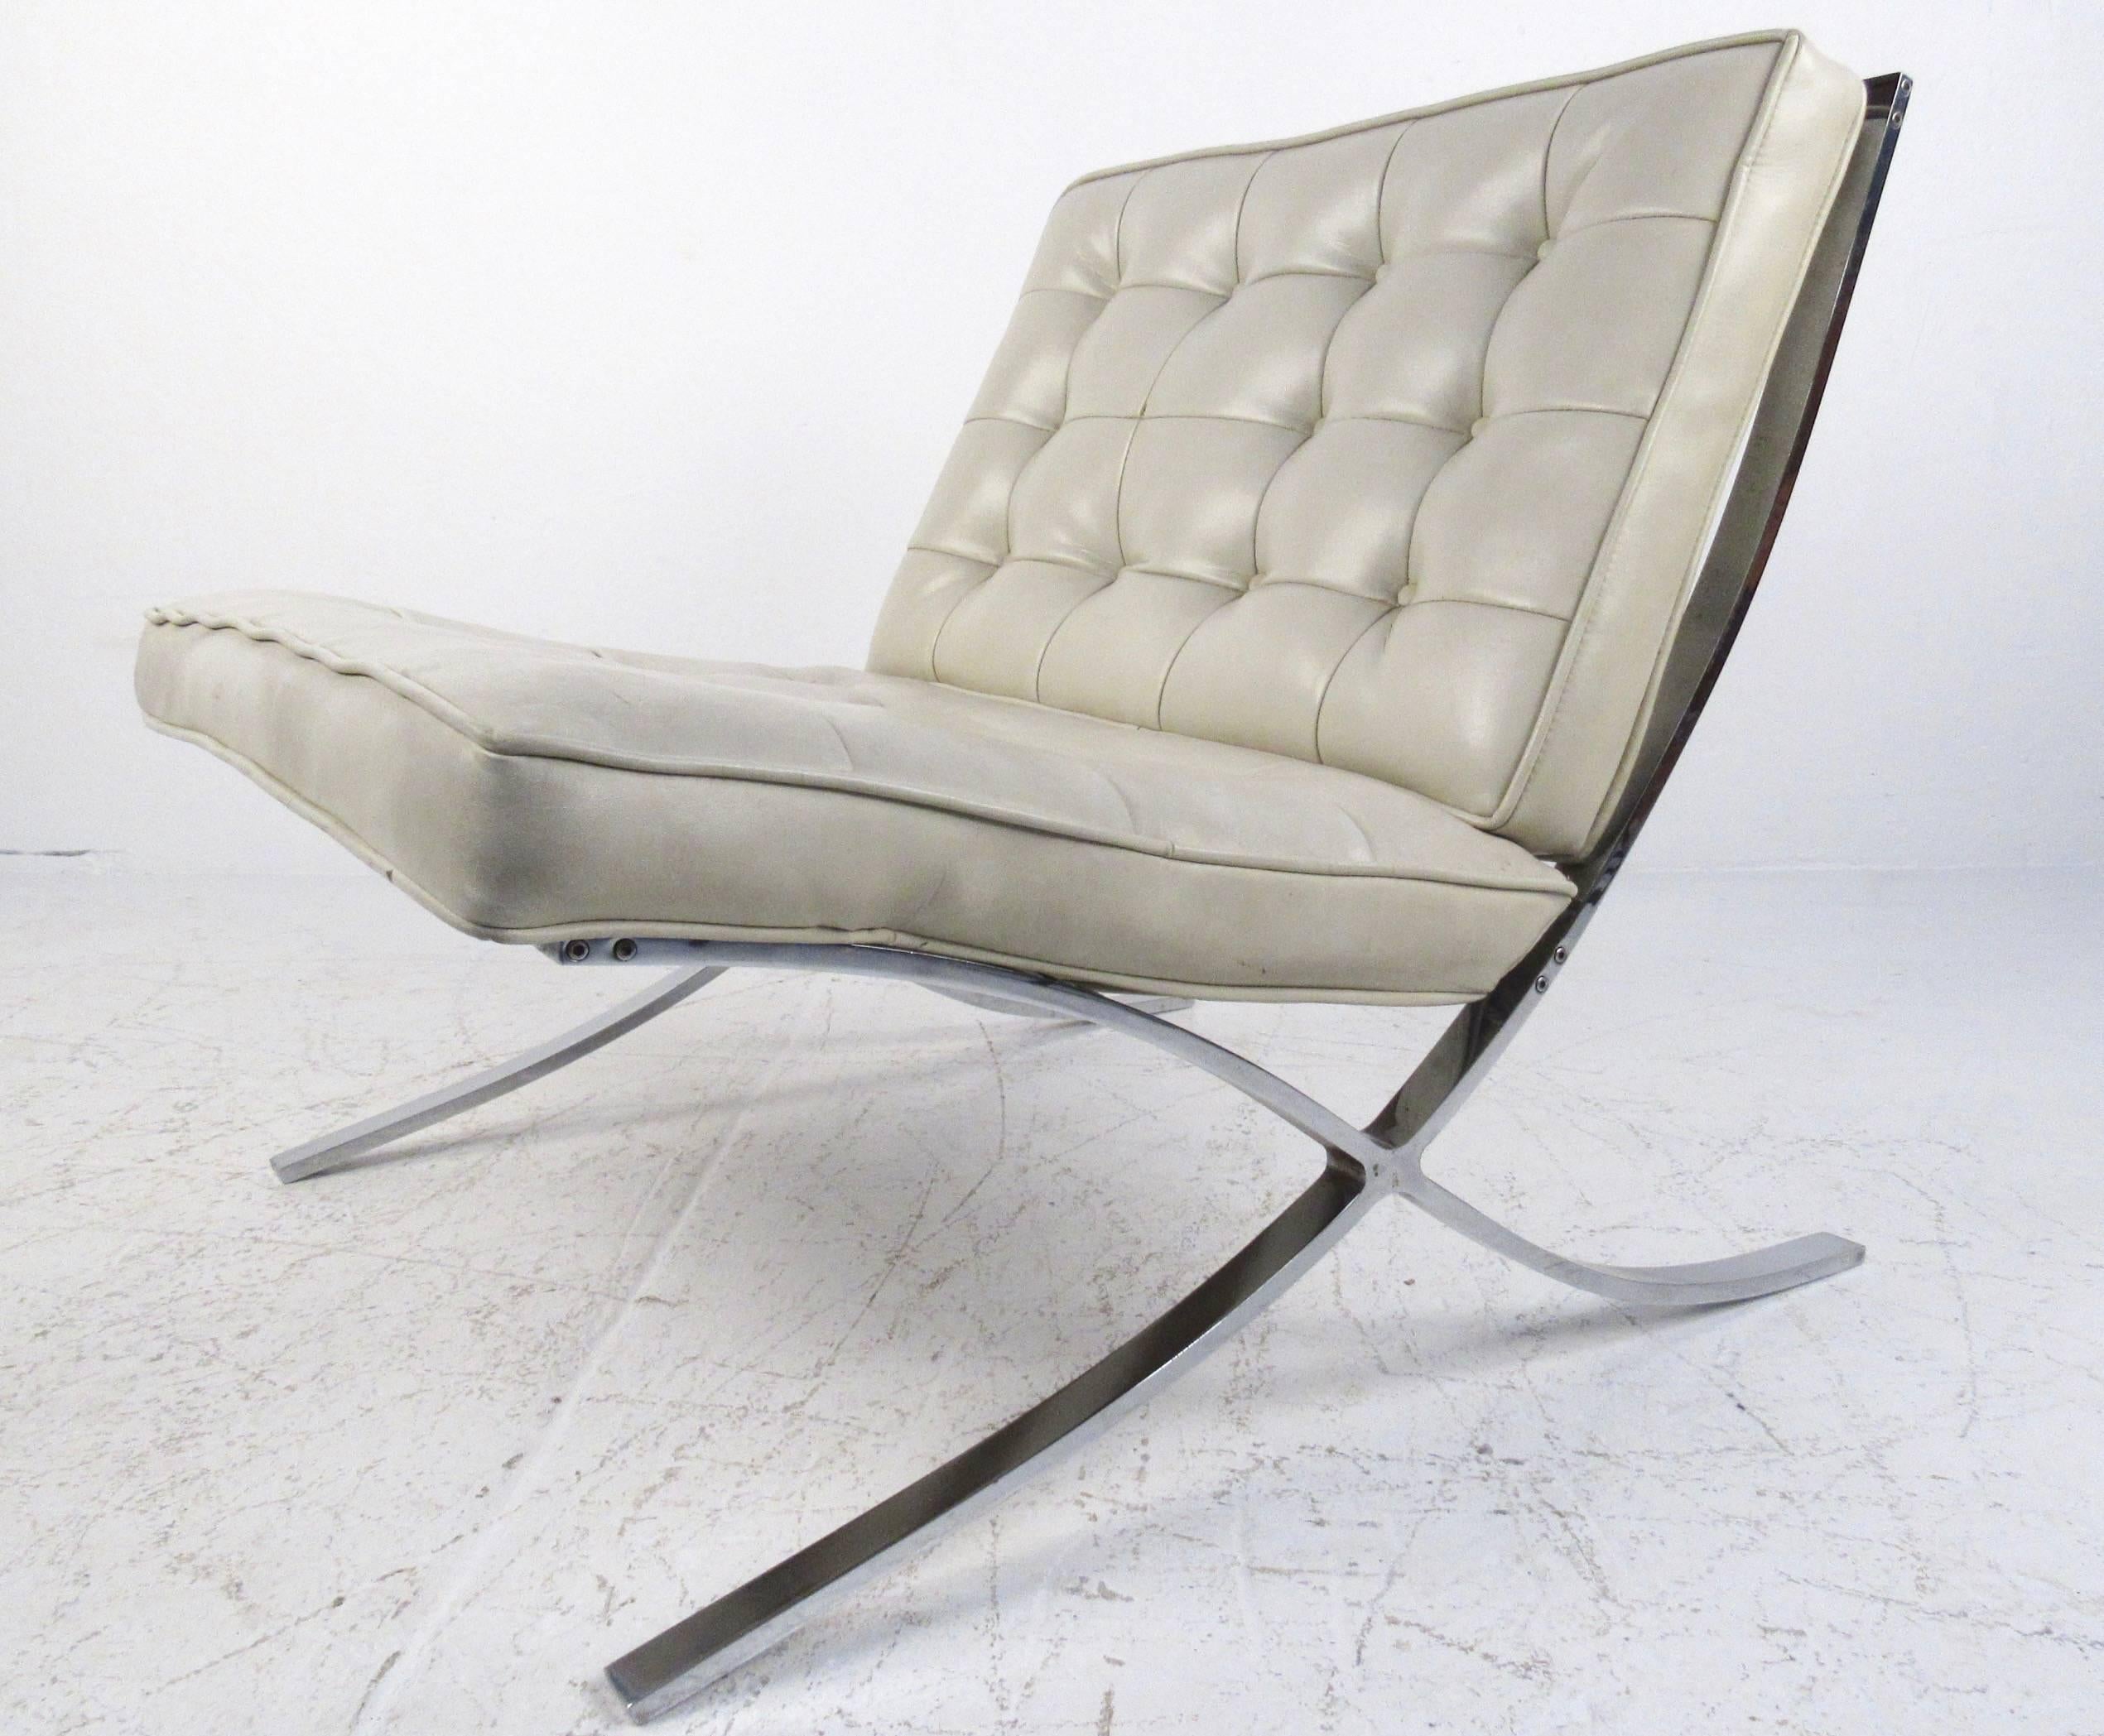 Pair of Mid-Century Modern Barcelona Style Lounge Chairs In Good Condition For Sale In Brooklyn, NY